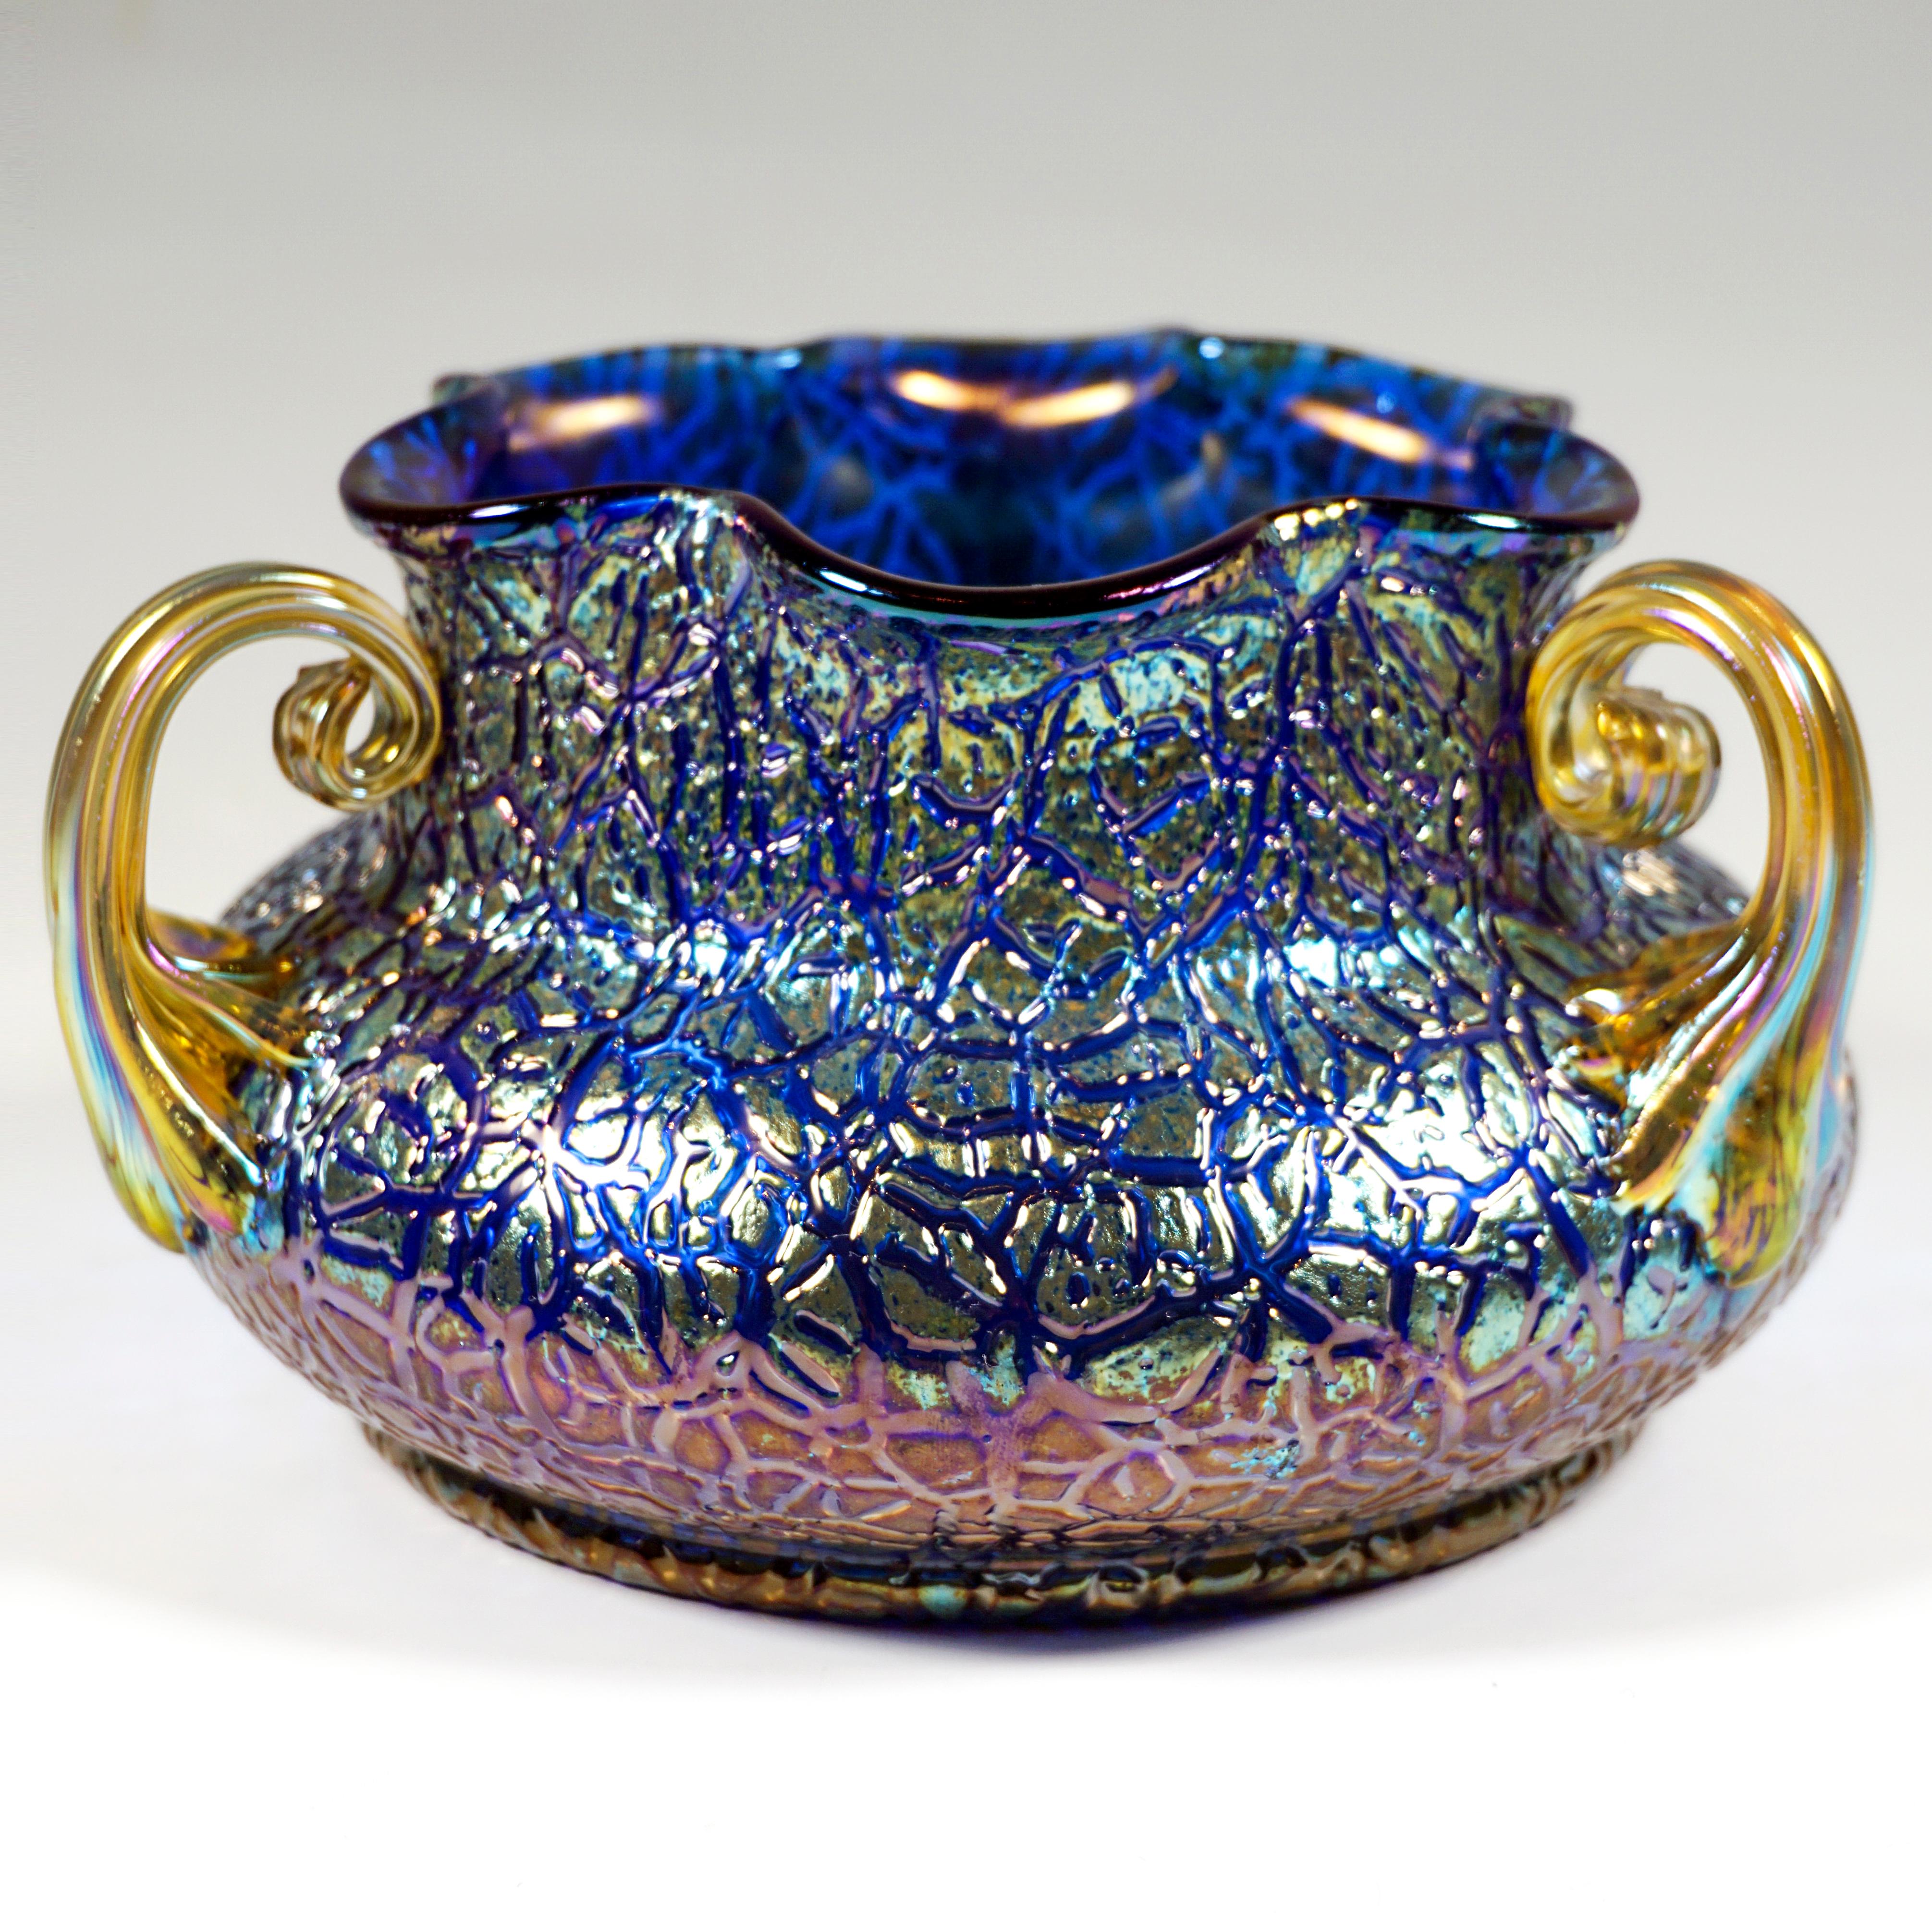 Hand-Crafted Loetz Art Nouveau Vase Cobalt Mimosa With 3 Handles, Austria-Hungary, circa 1911 For Sale